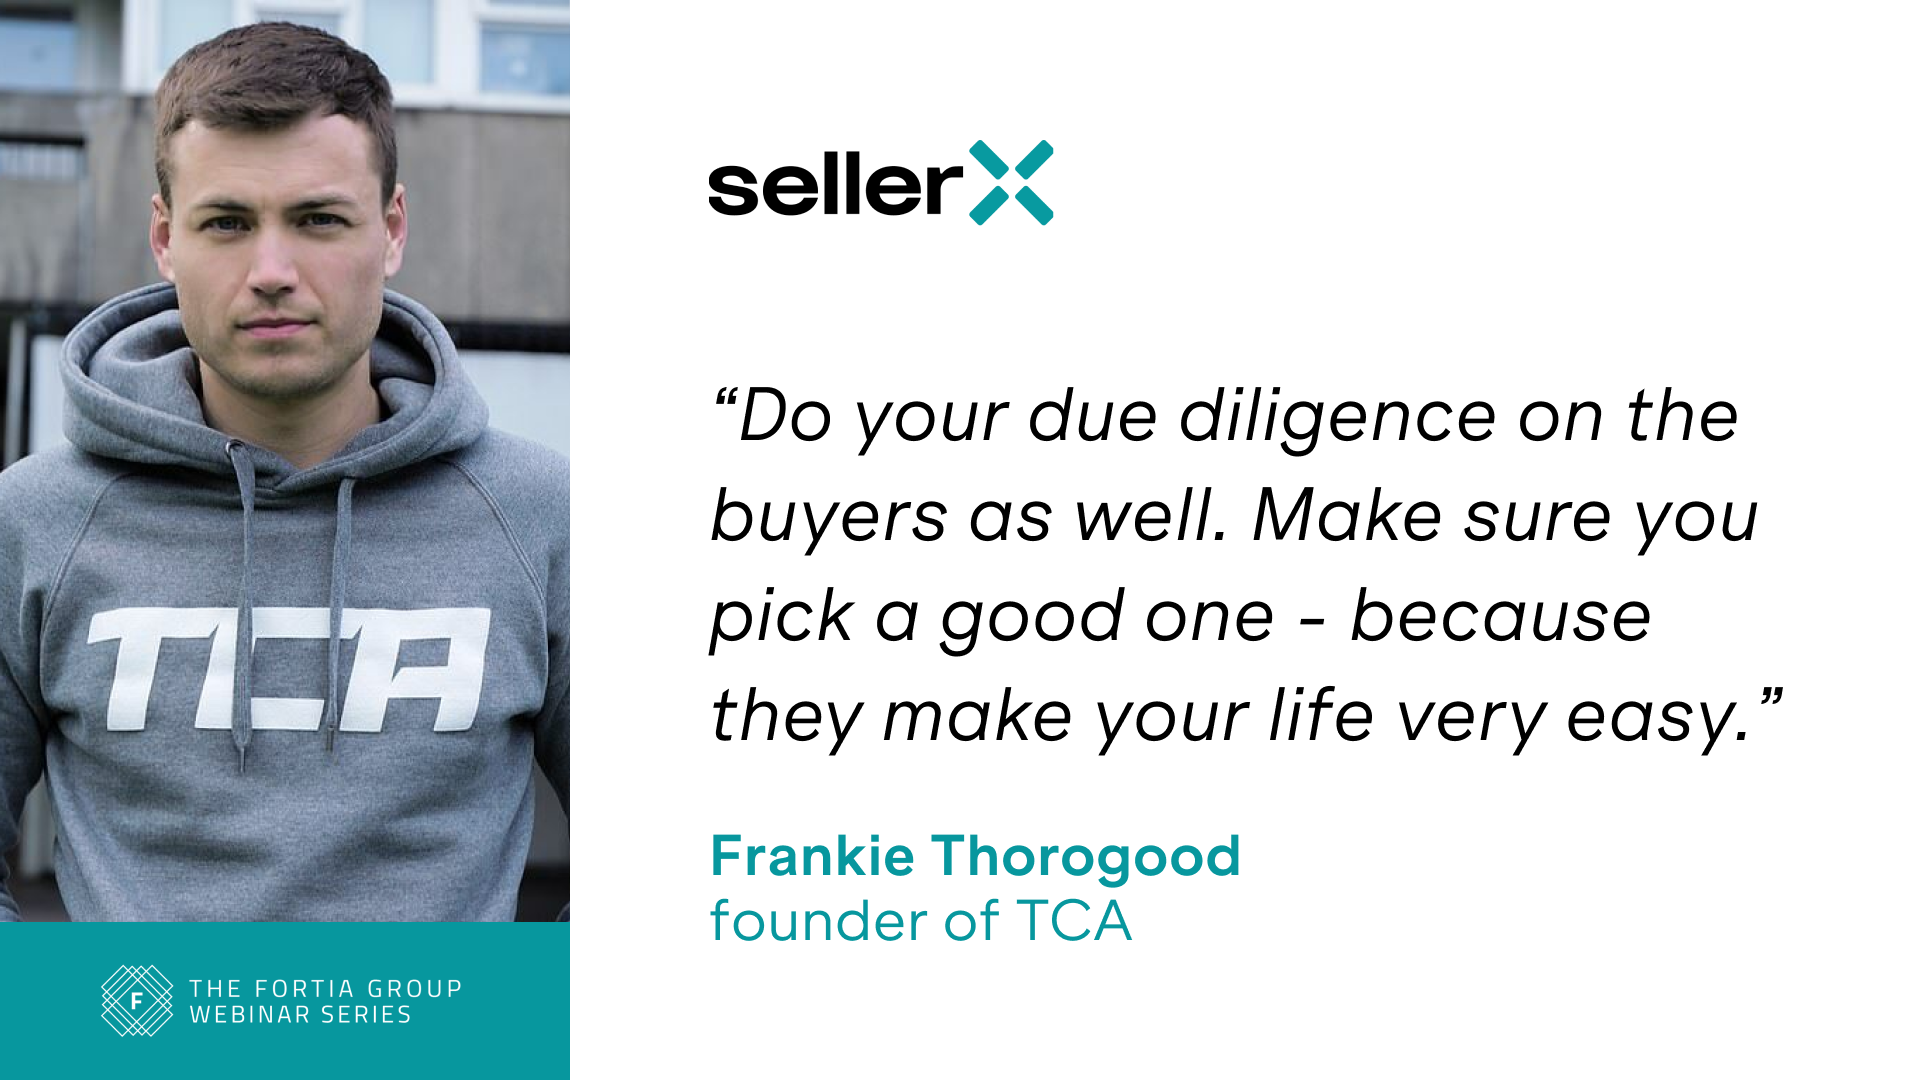 Frankie from TCA on why he sold his Amazon FBA business